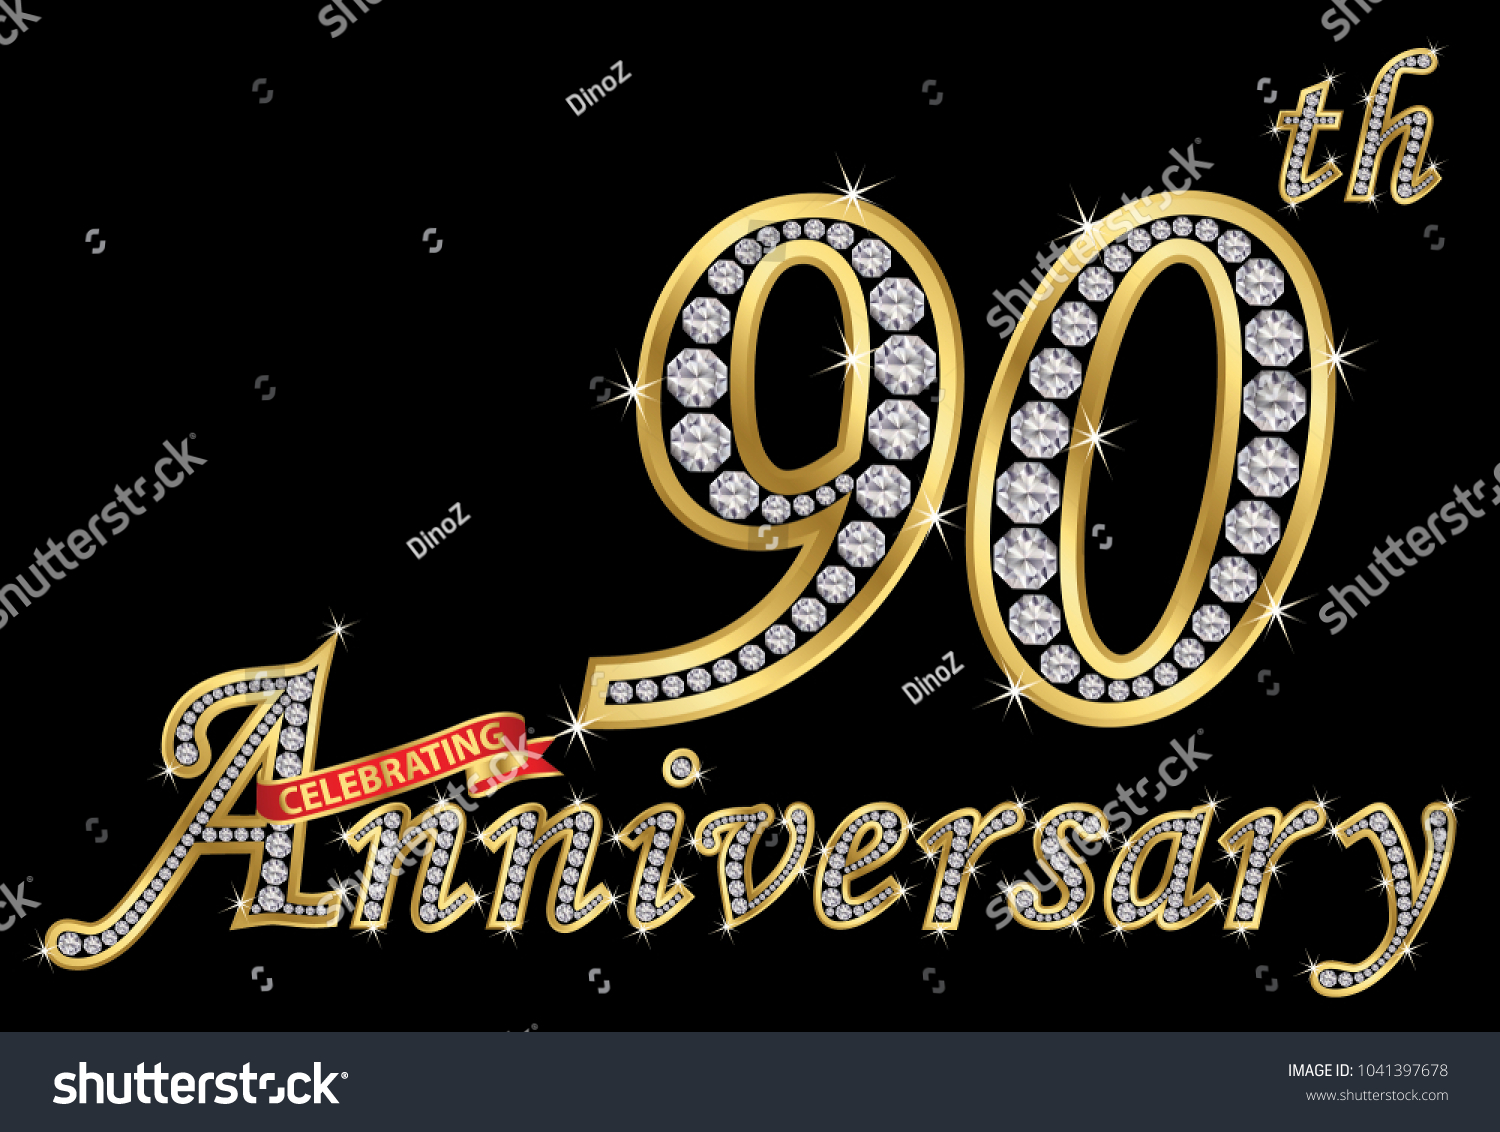 SVG of Celebrating  90th anniversary golden sign with diamonds, vector illustration svg